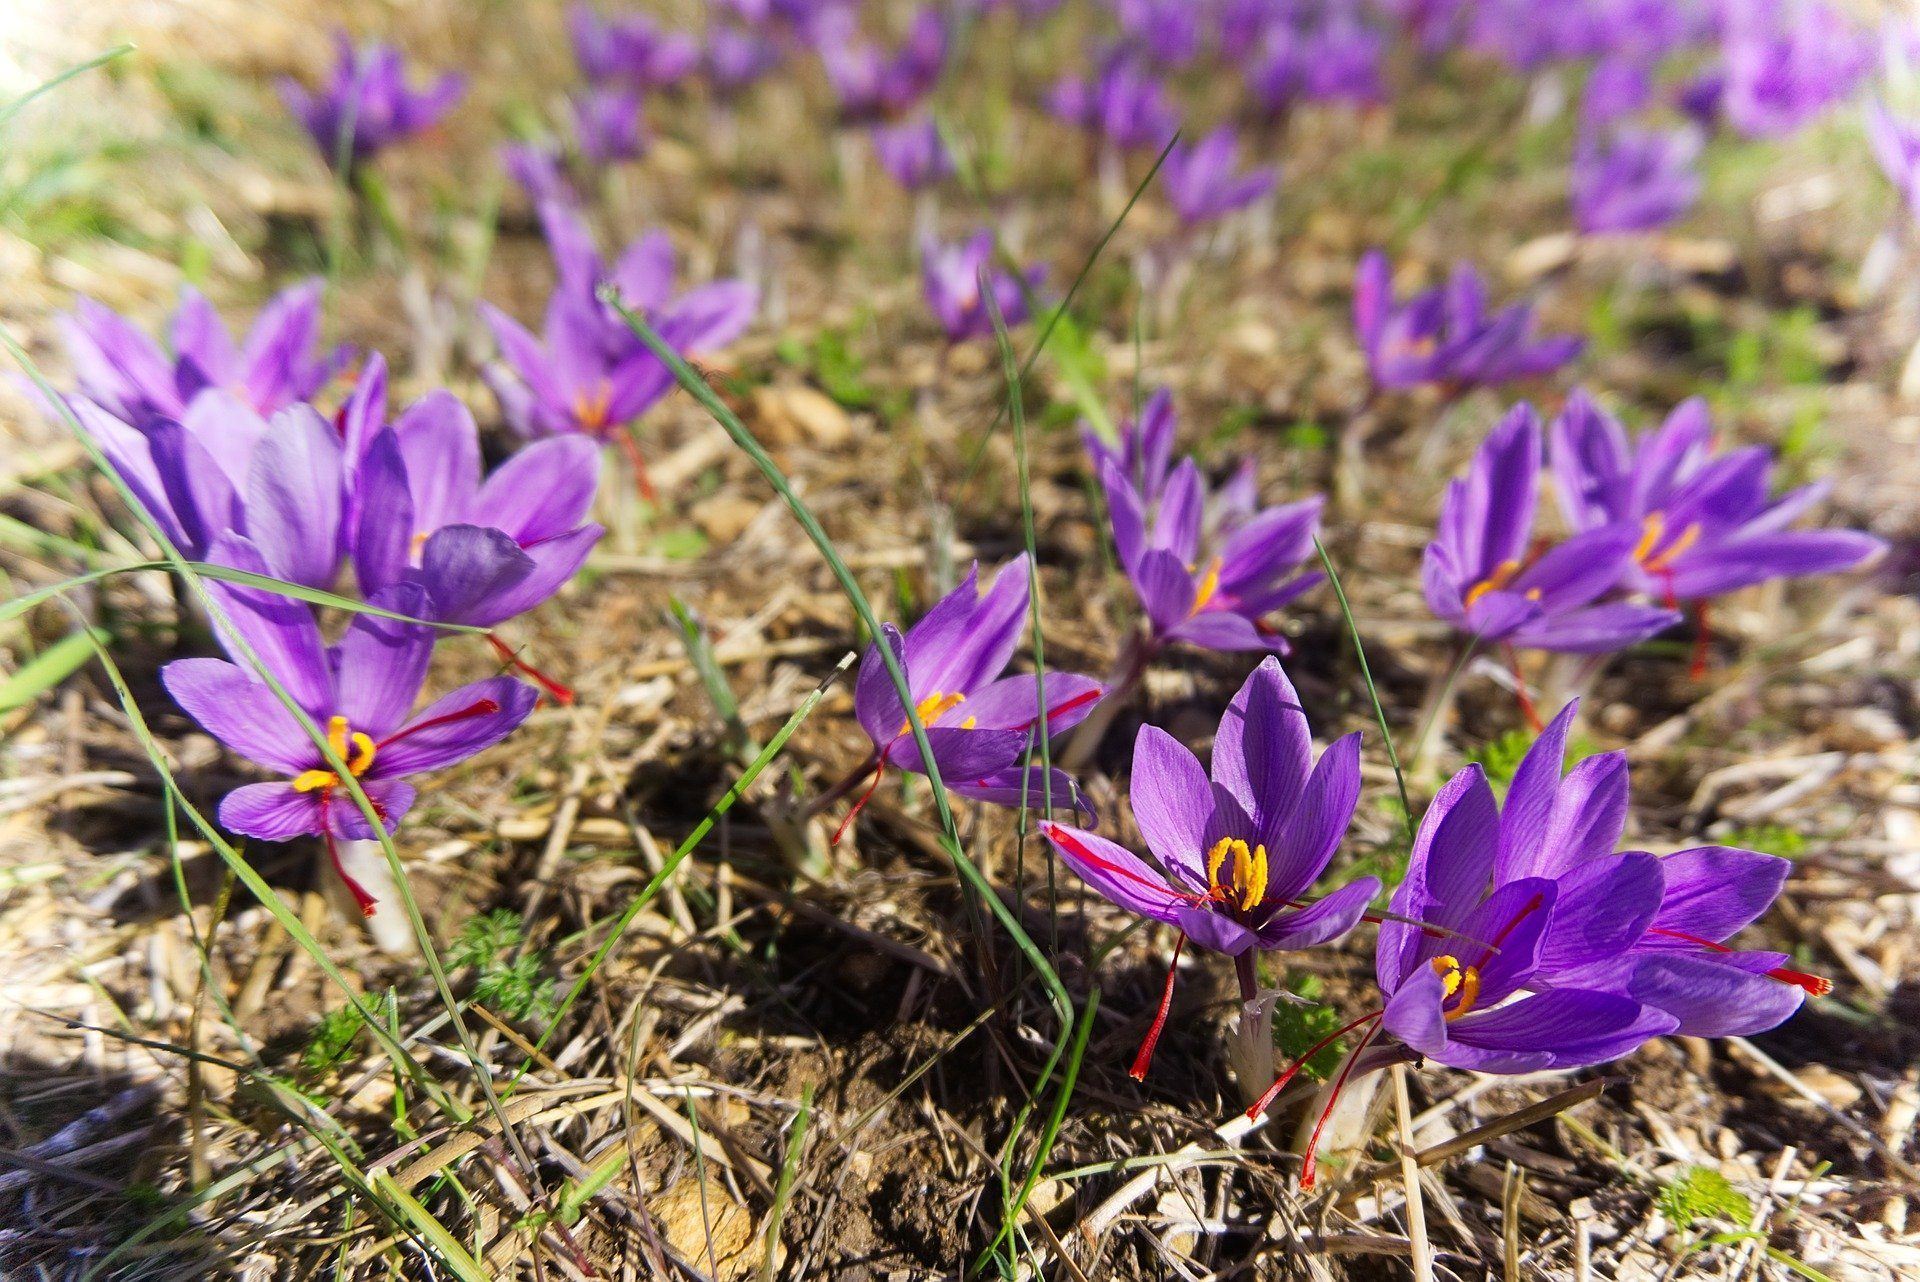 Saffron Price: Why It's The Most Expensive Spice